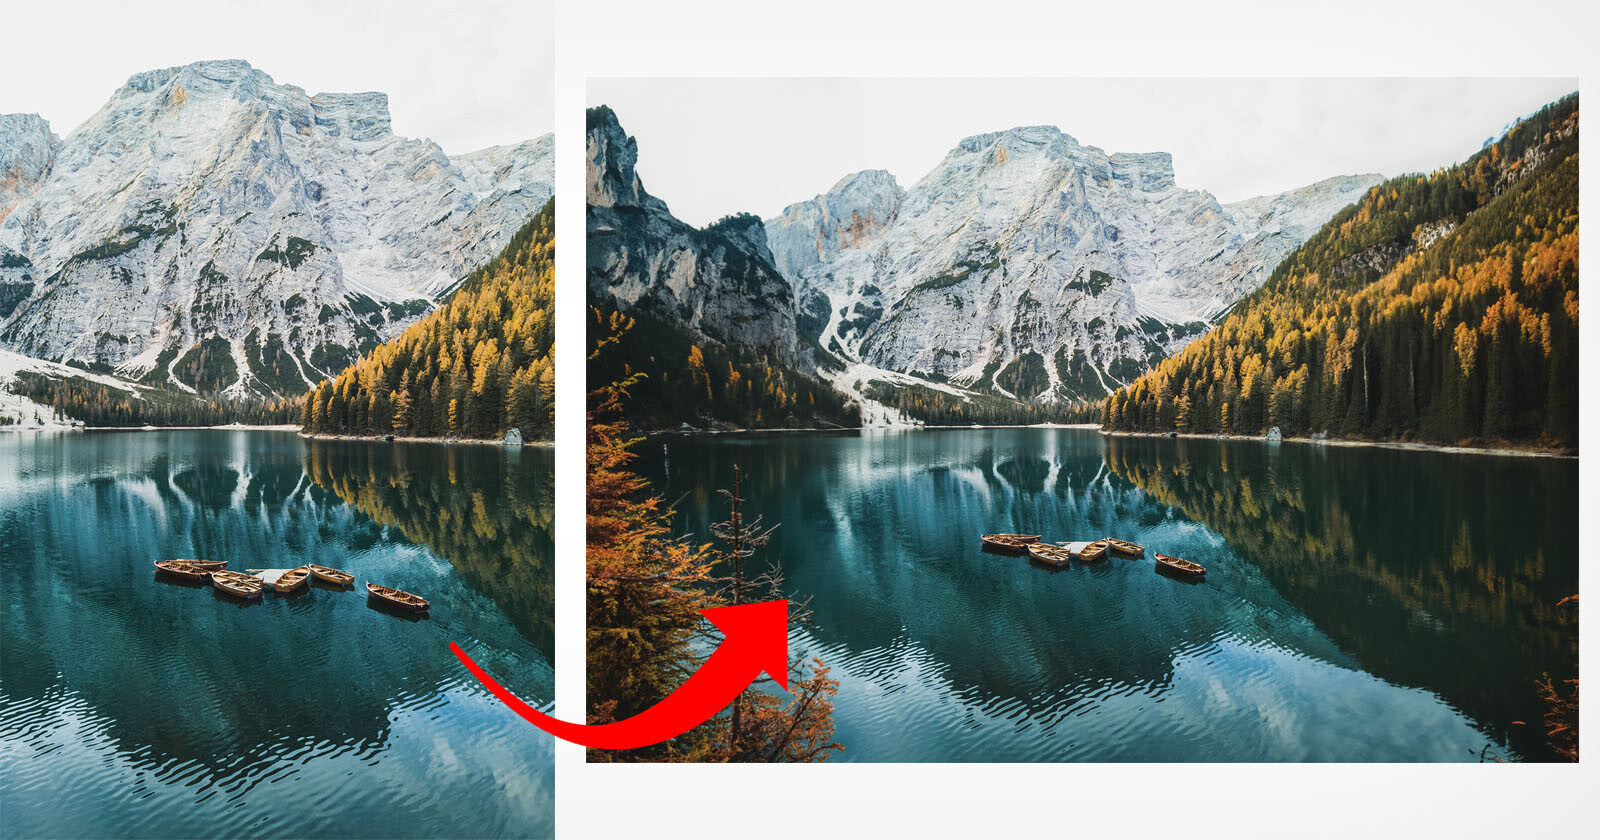 Photoshops New Generative Fill Uses AI to Expand or Change Photos